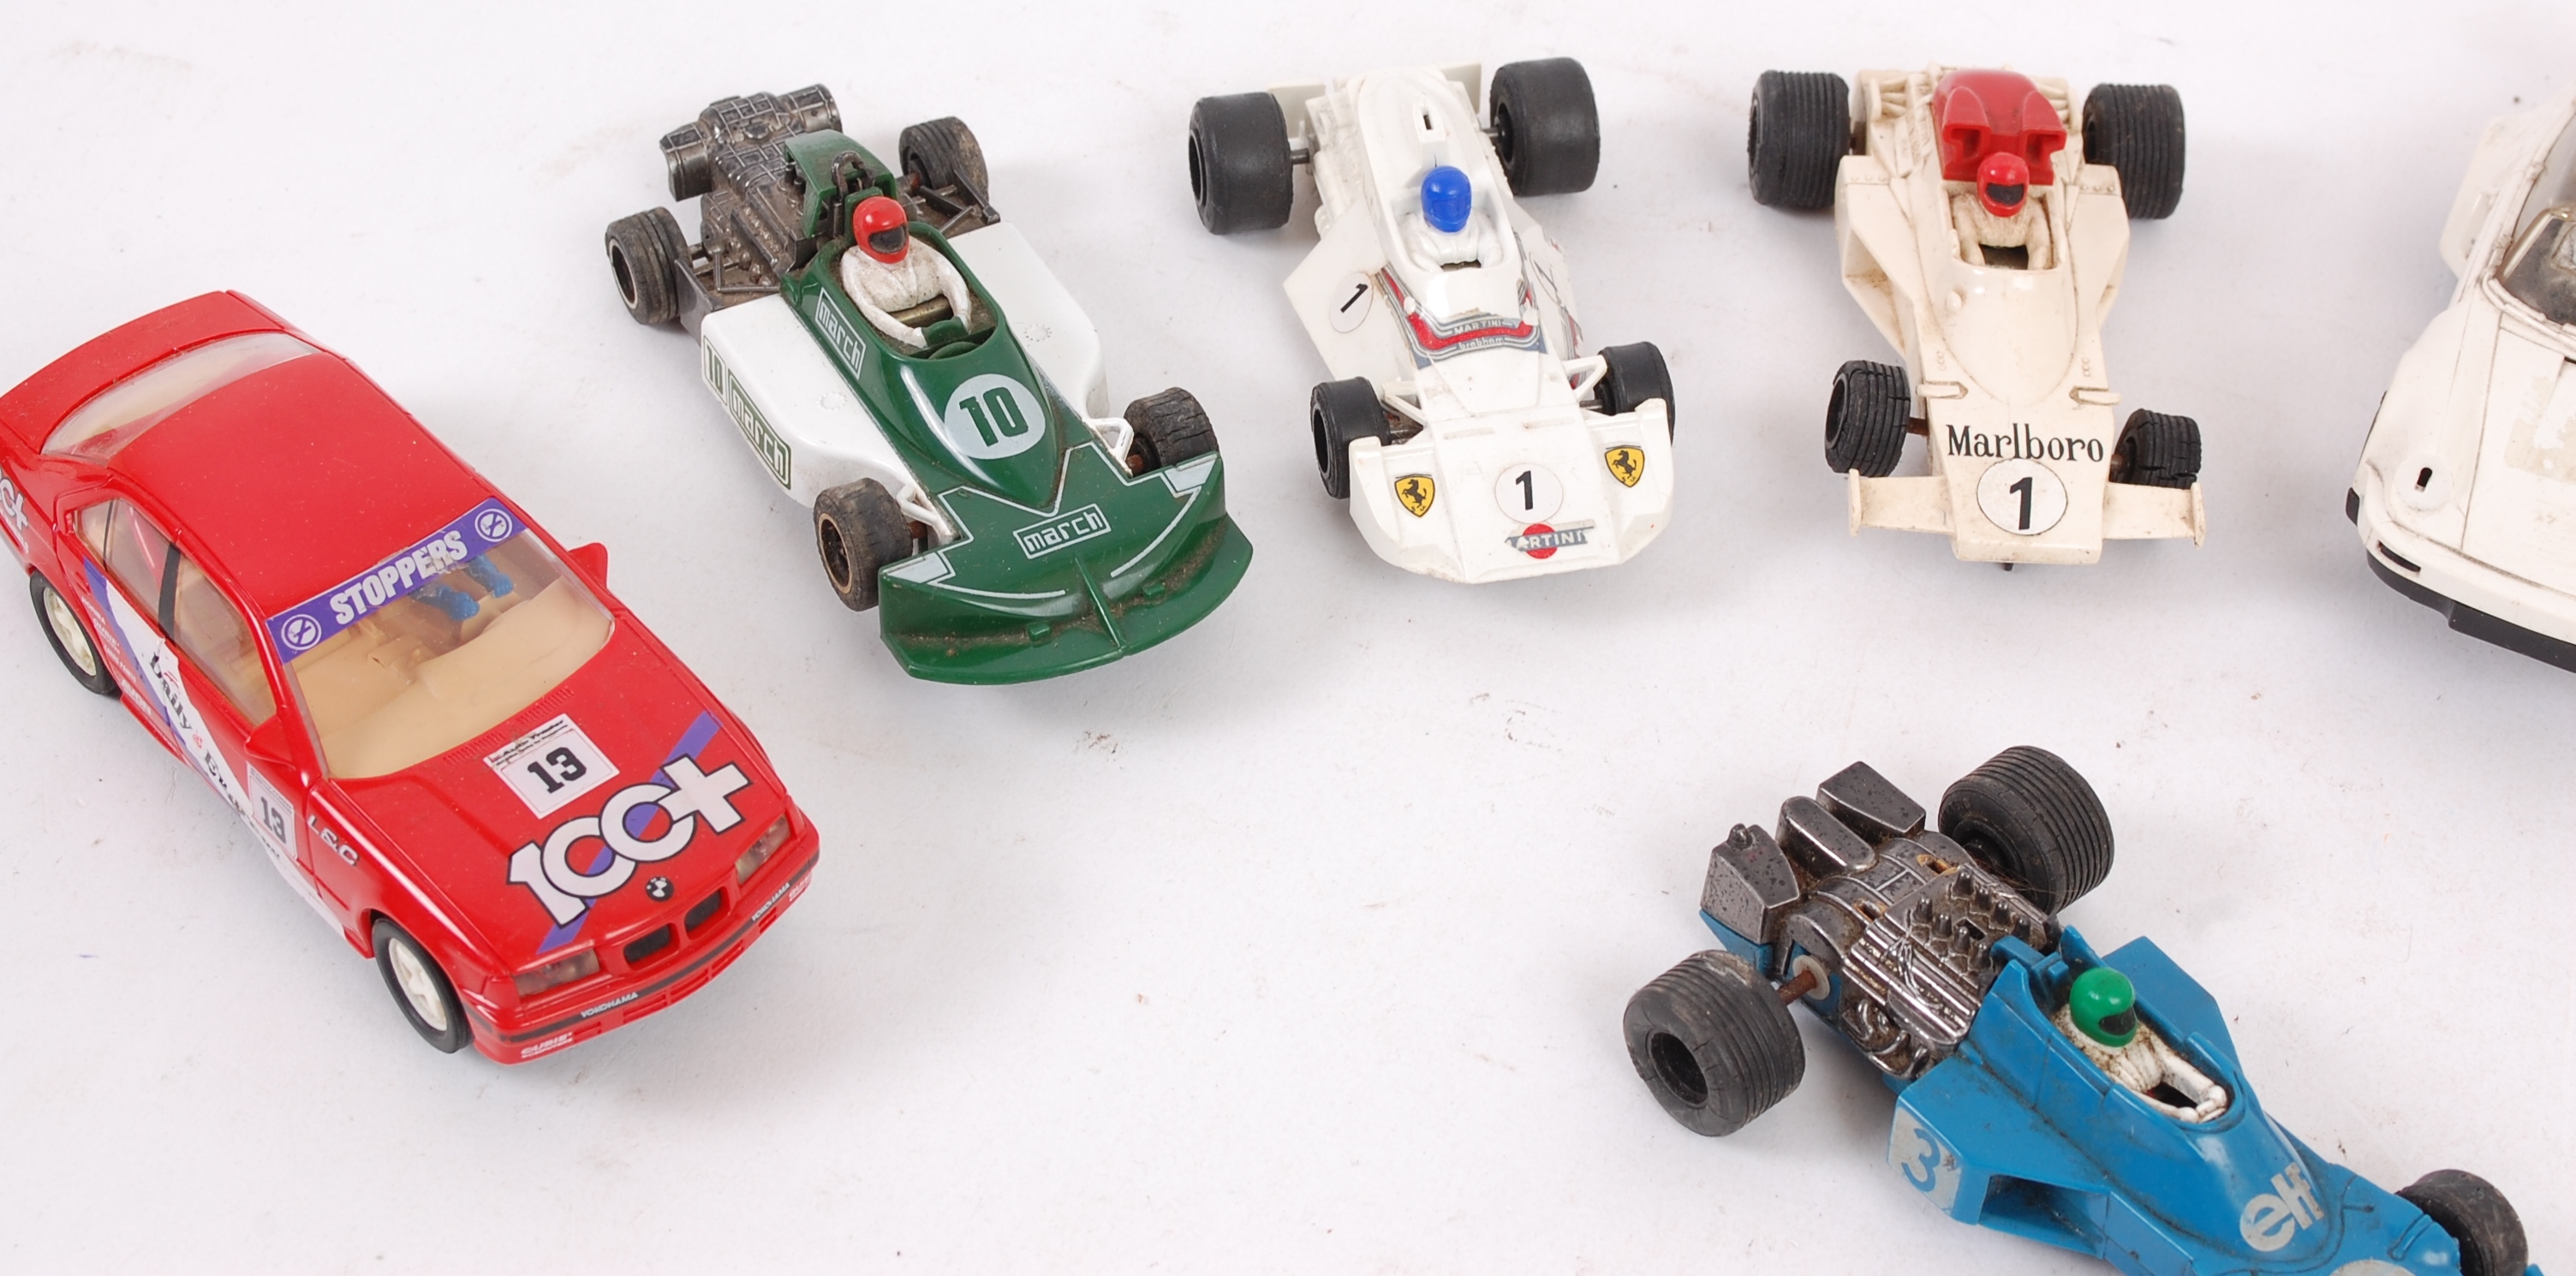 SCALEXTRIC; A collection of 10x assorted loose Scalextric racing cars. - Image 2 of 3